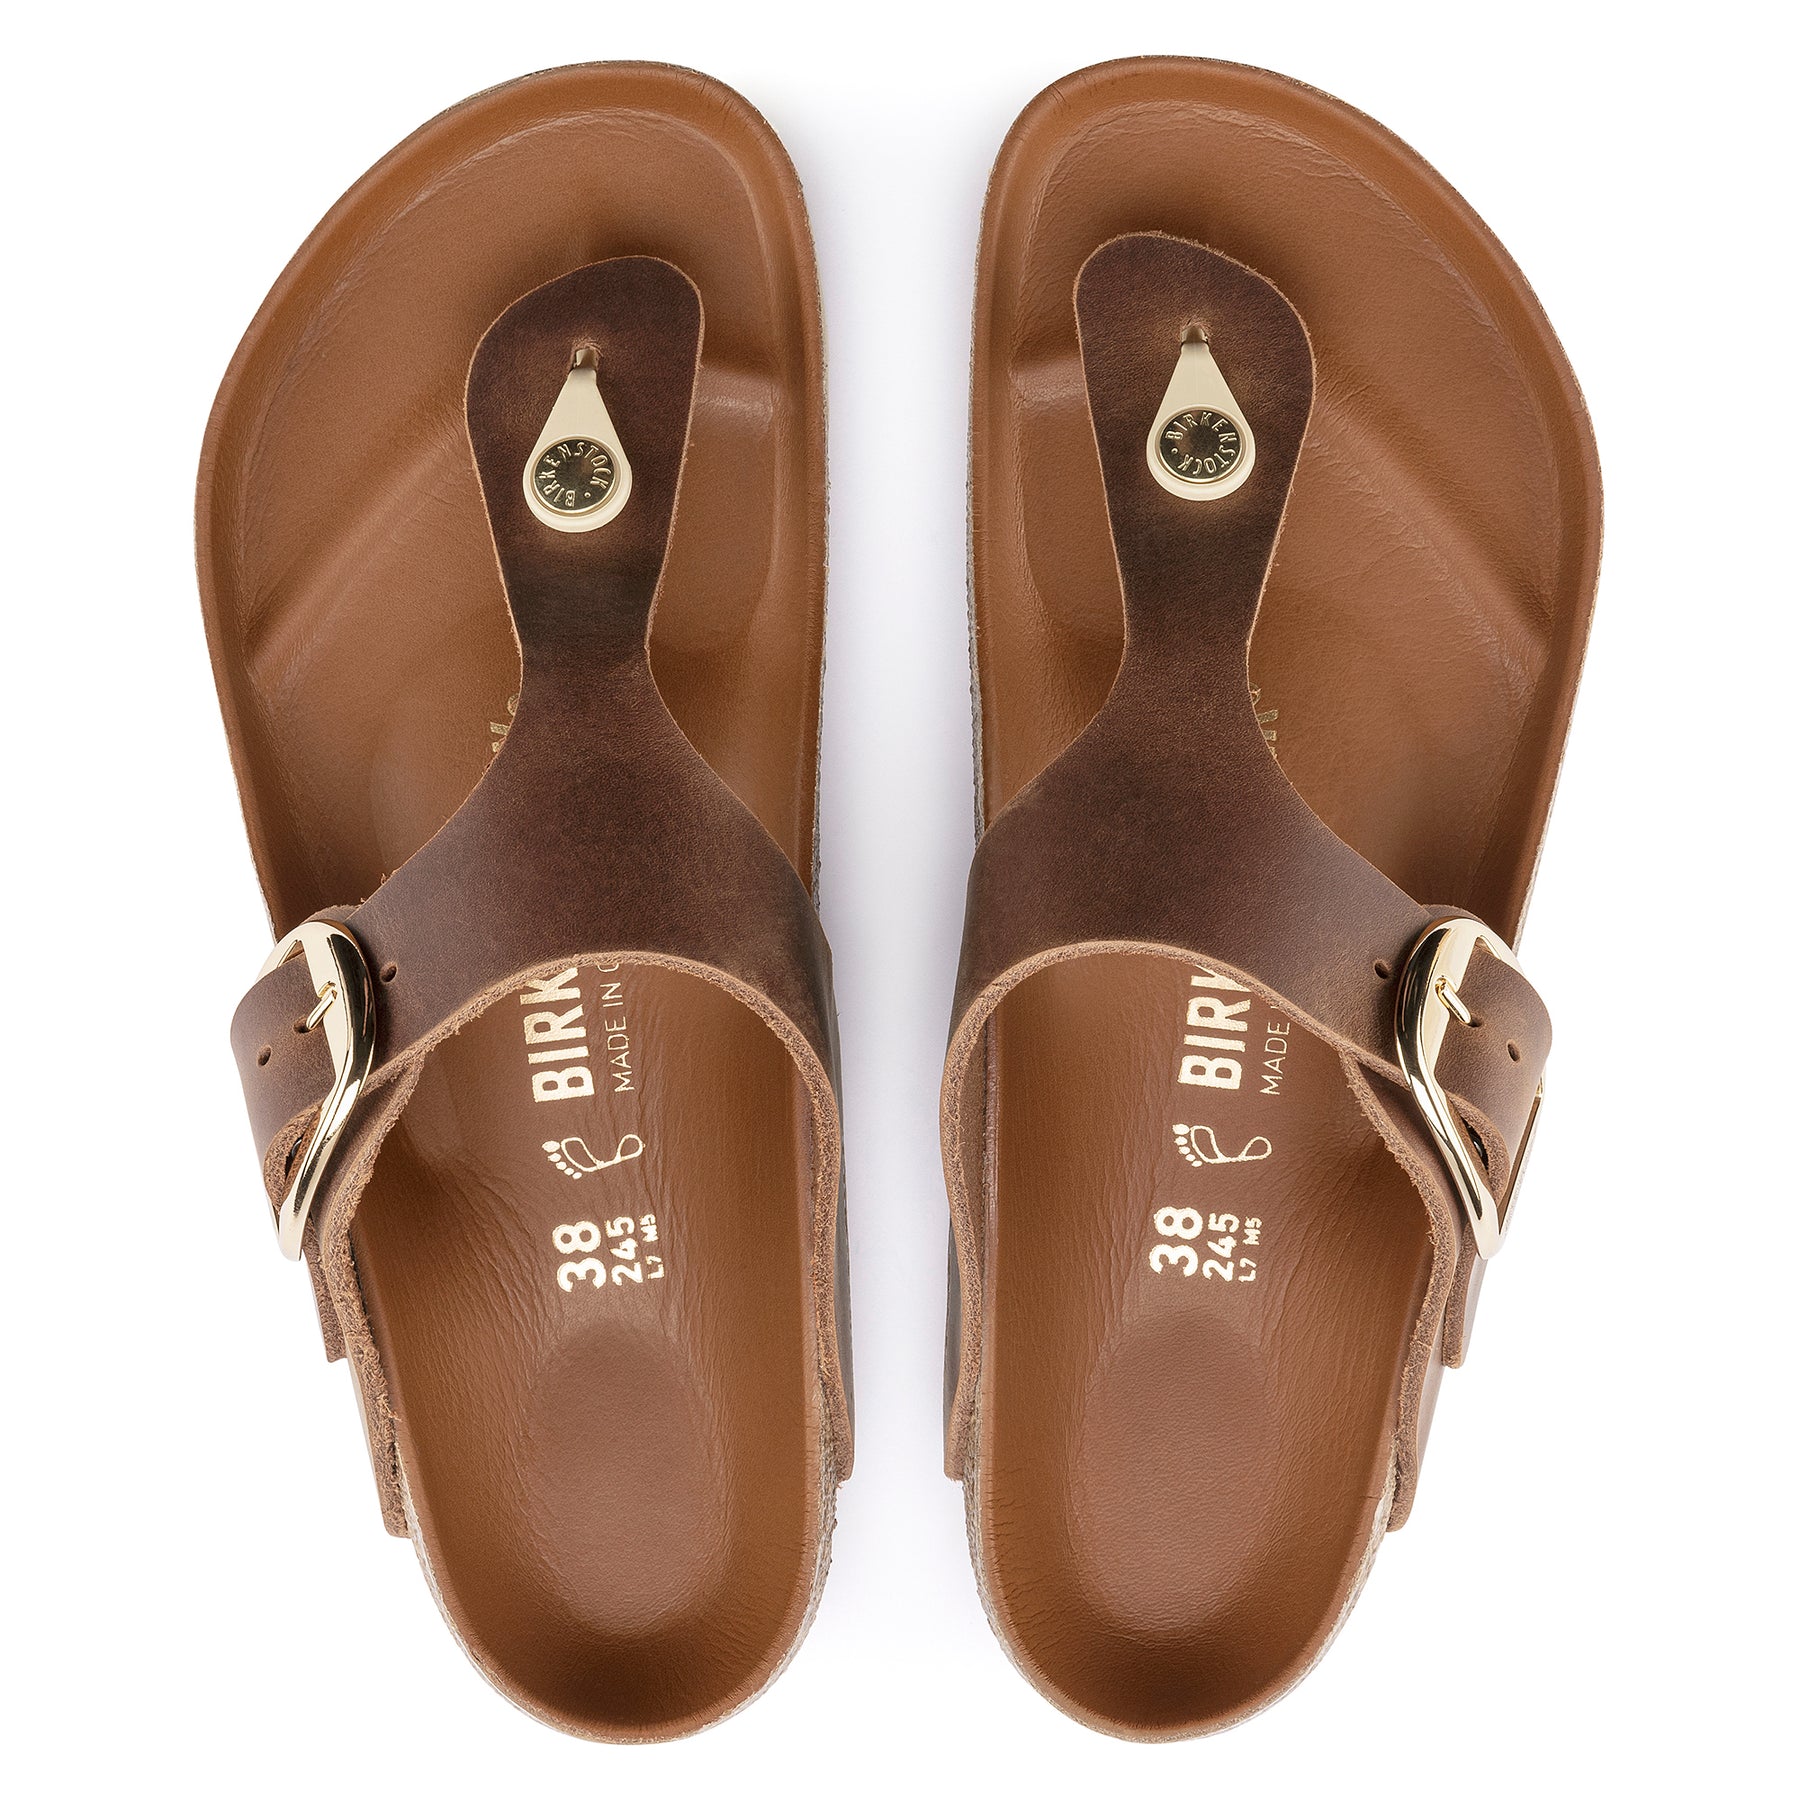 Birkenstock Limited Edition Gizeh Big Buckle cognac oiled leather